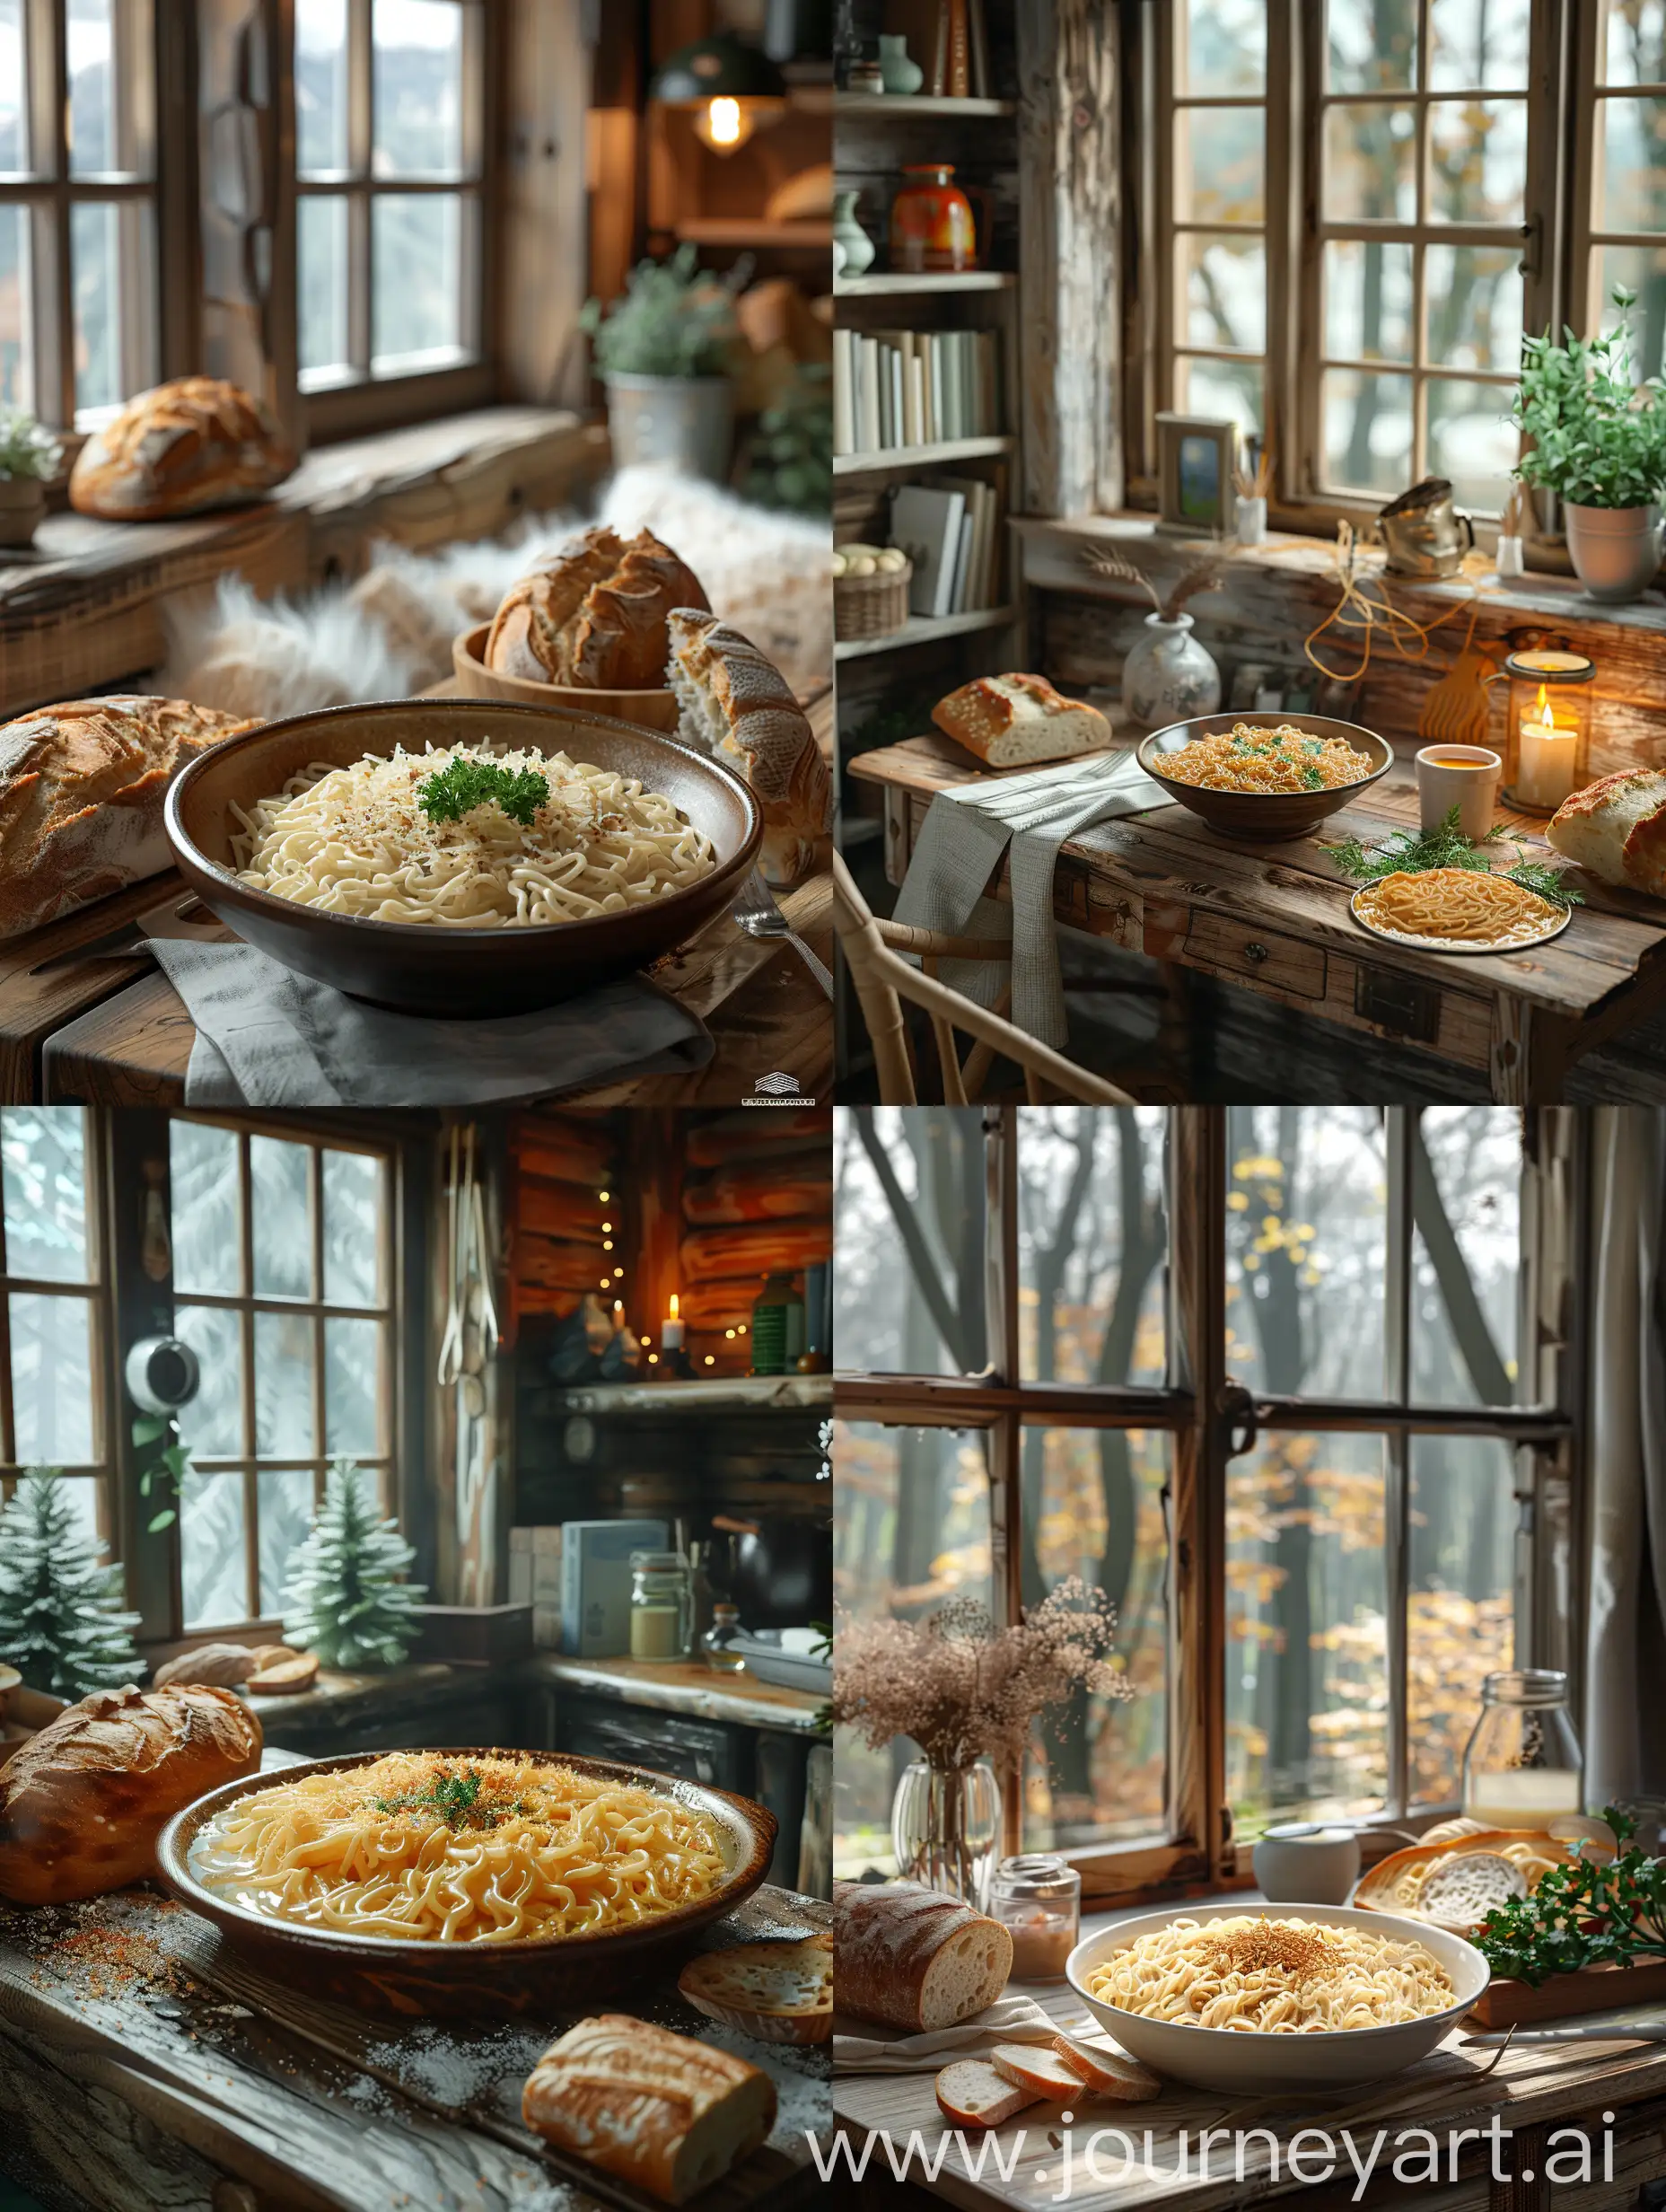 Homemade-Noodles-and-Fresh-Bread-in-Cozy-Cabin-Setting